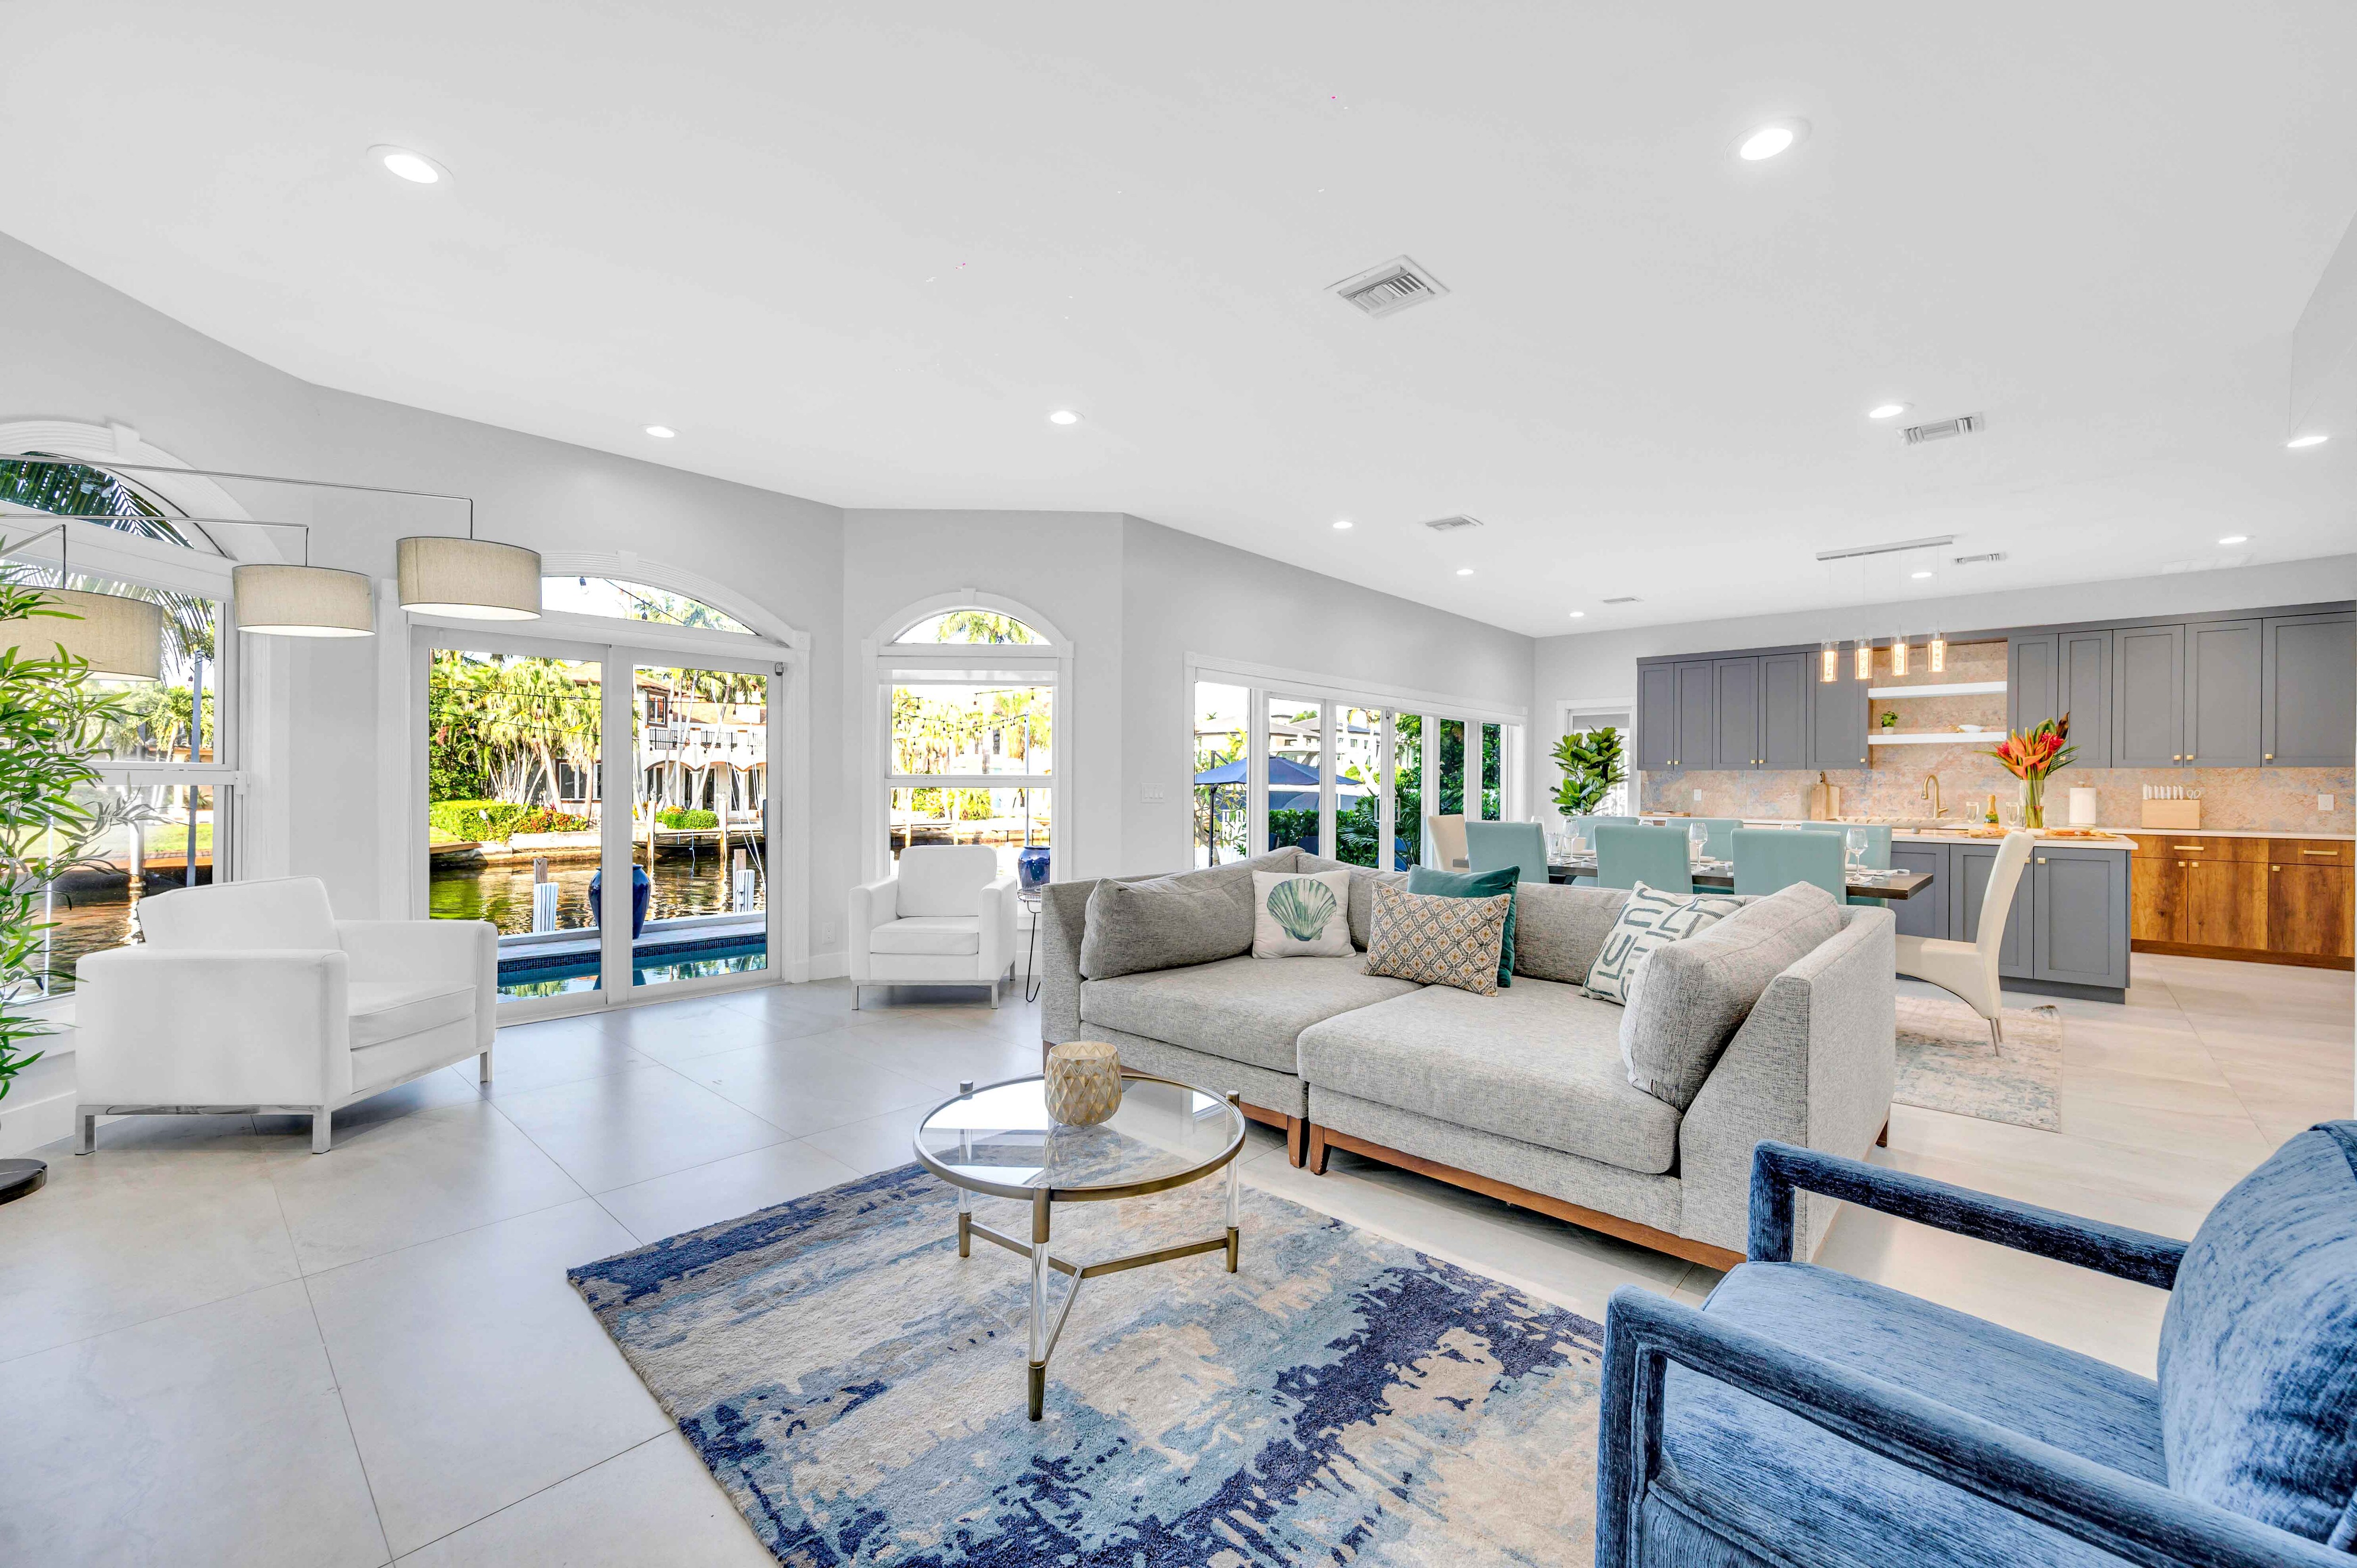 The open floor family room with the kitchen and dinning table offers a view of the waterfront and the heated swimming pool.